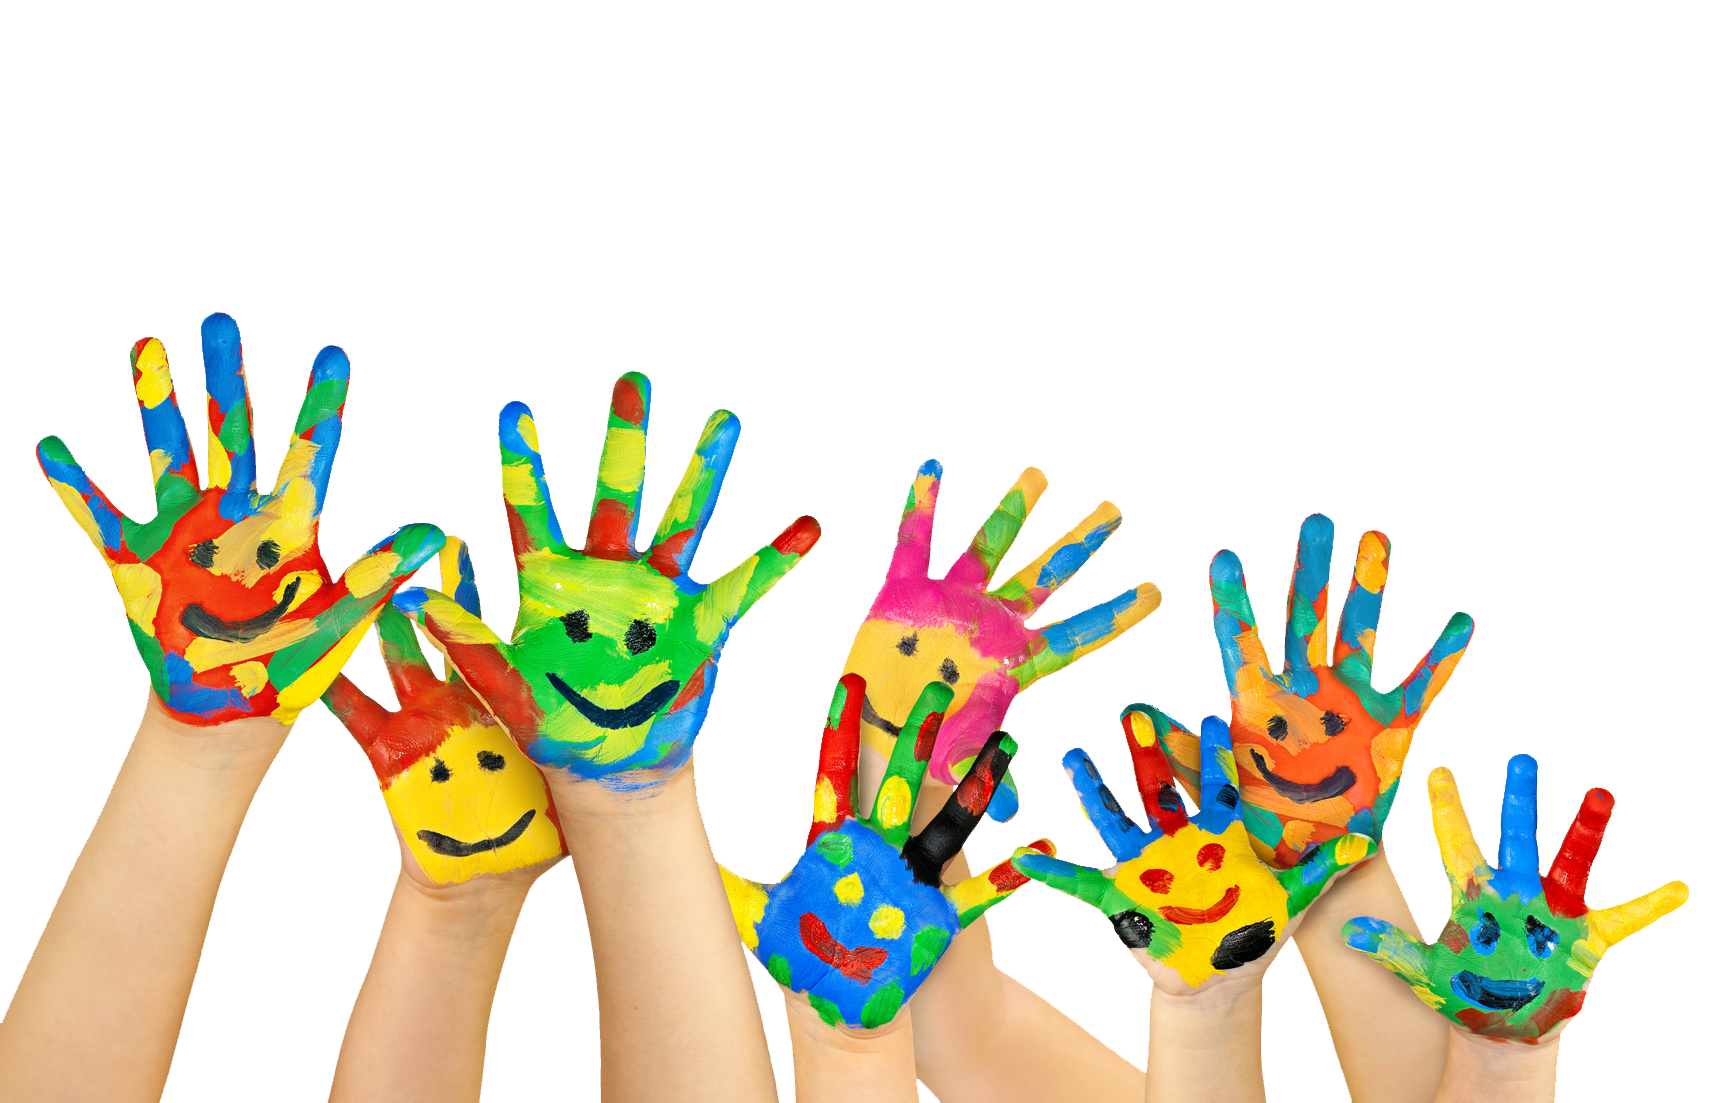 Eight children's hands raised all painted in multiple colors with smiley faces.